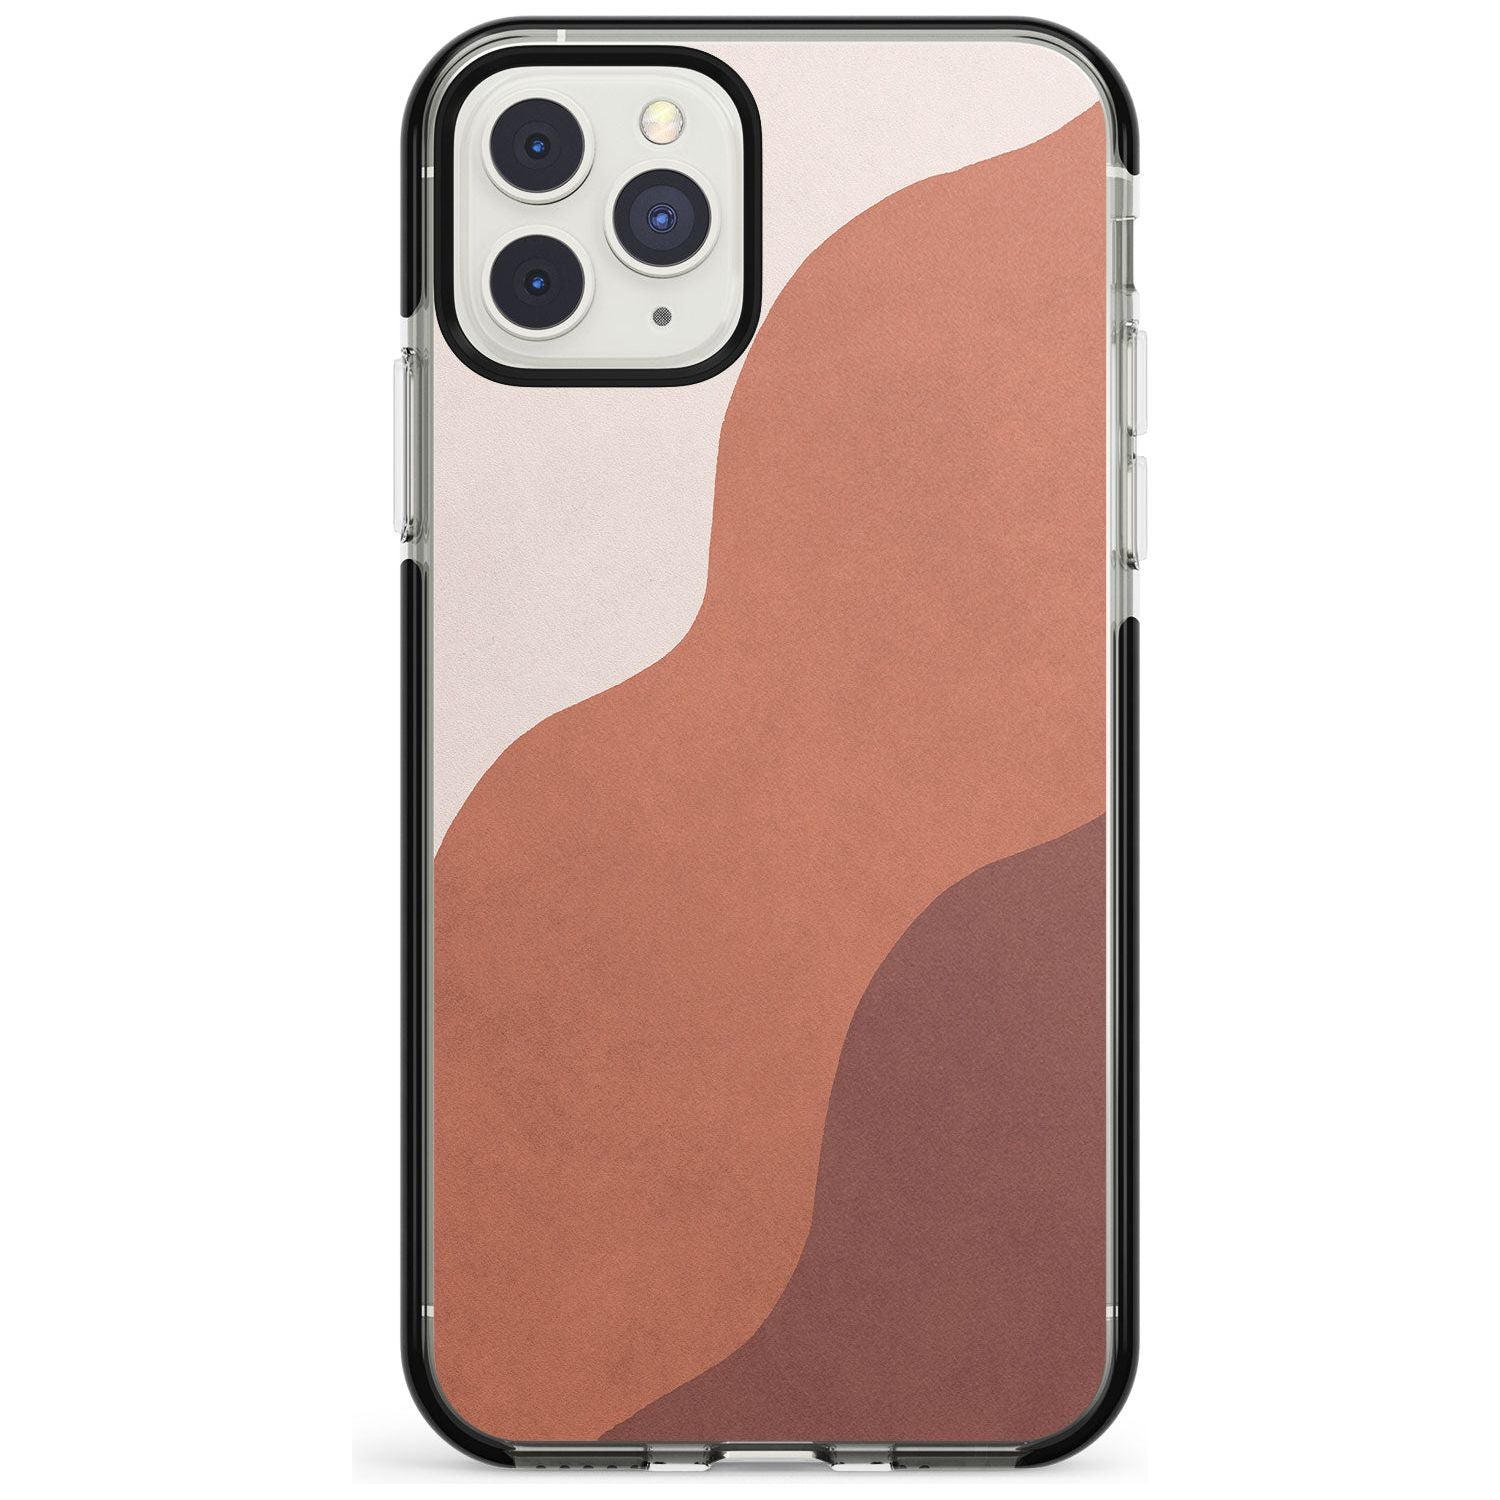 Lush Abstract Watercolour Design #3 Phone Case iPhone 11 Pro Max / Black Impact Case,iPhone 11 Pro / Black Impact Case,iPhone 12 Pro Max / Black Impact Case Blanc Space